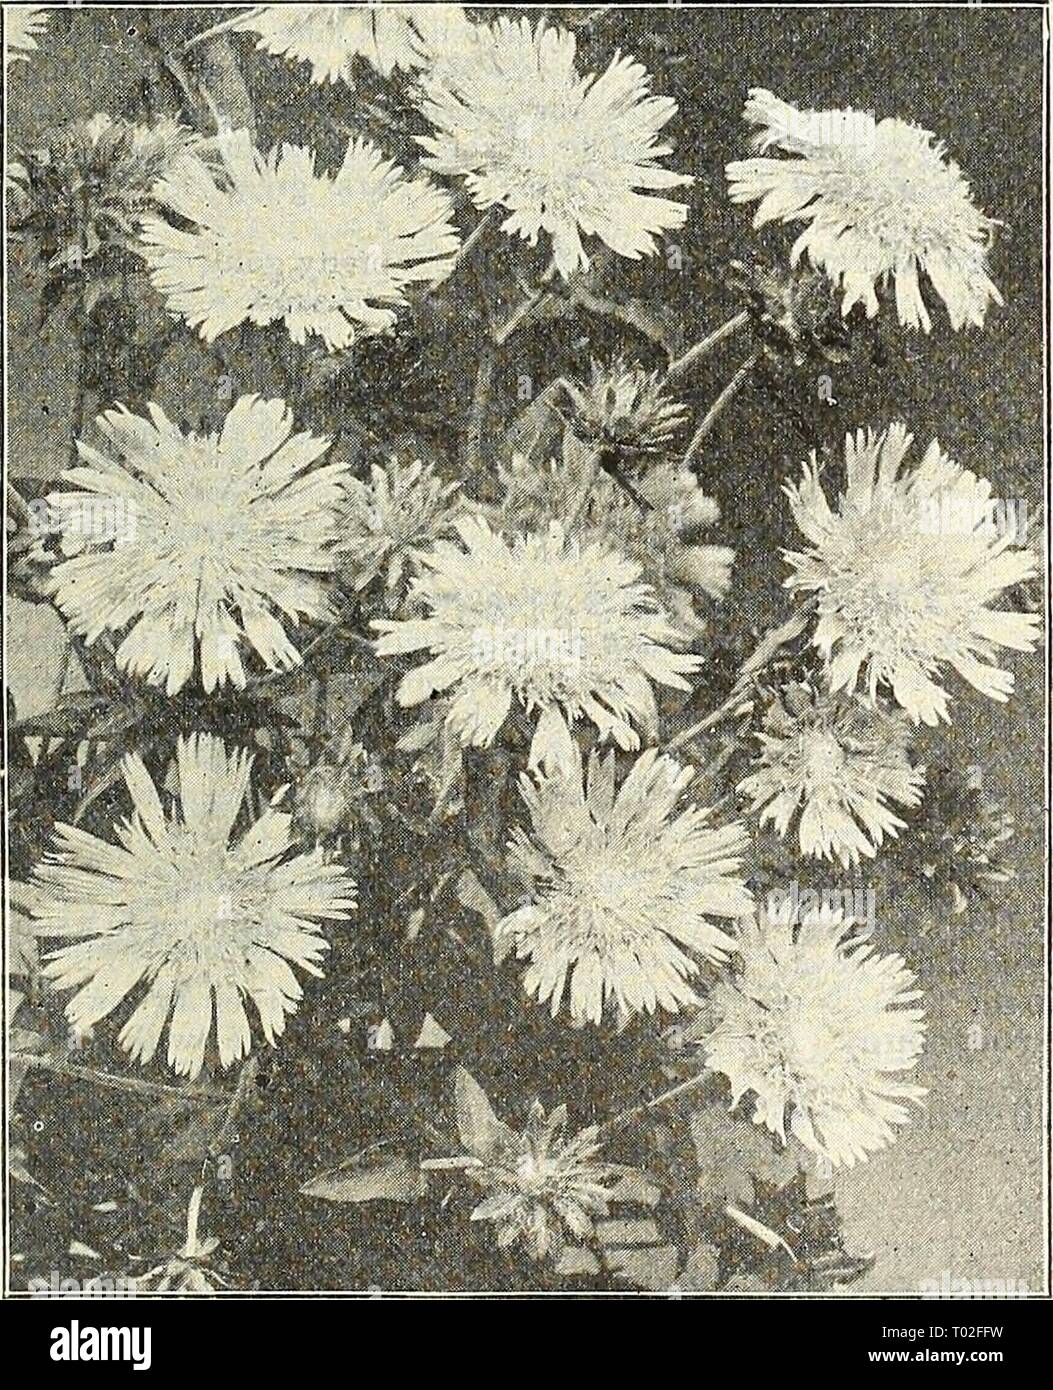 Dreer's garden calendar : 1903 . dreersgardencale1903henr Year: 1903  Statice Latifolia.    Stokusia Cyanea (Cornflower Aster). STACHVS (Woundwort). Betonica Rosea (Be/ony). Grows in spreading clumps about 10 inches high, and produces interesting 2 to 3 inch long spikes of rosy-pink flowers during June and July. Grandiflora Superba. Grows 12 to 15 inches high, with purplish-violet colored spikes of flowers. Lanata. Forms a densely-leaved mass of bright silvery-white woolly foliage and inconspicuous clusters of light purple flowers ; as a plant for edging or for clumps in the border or wherever Stock Photo